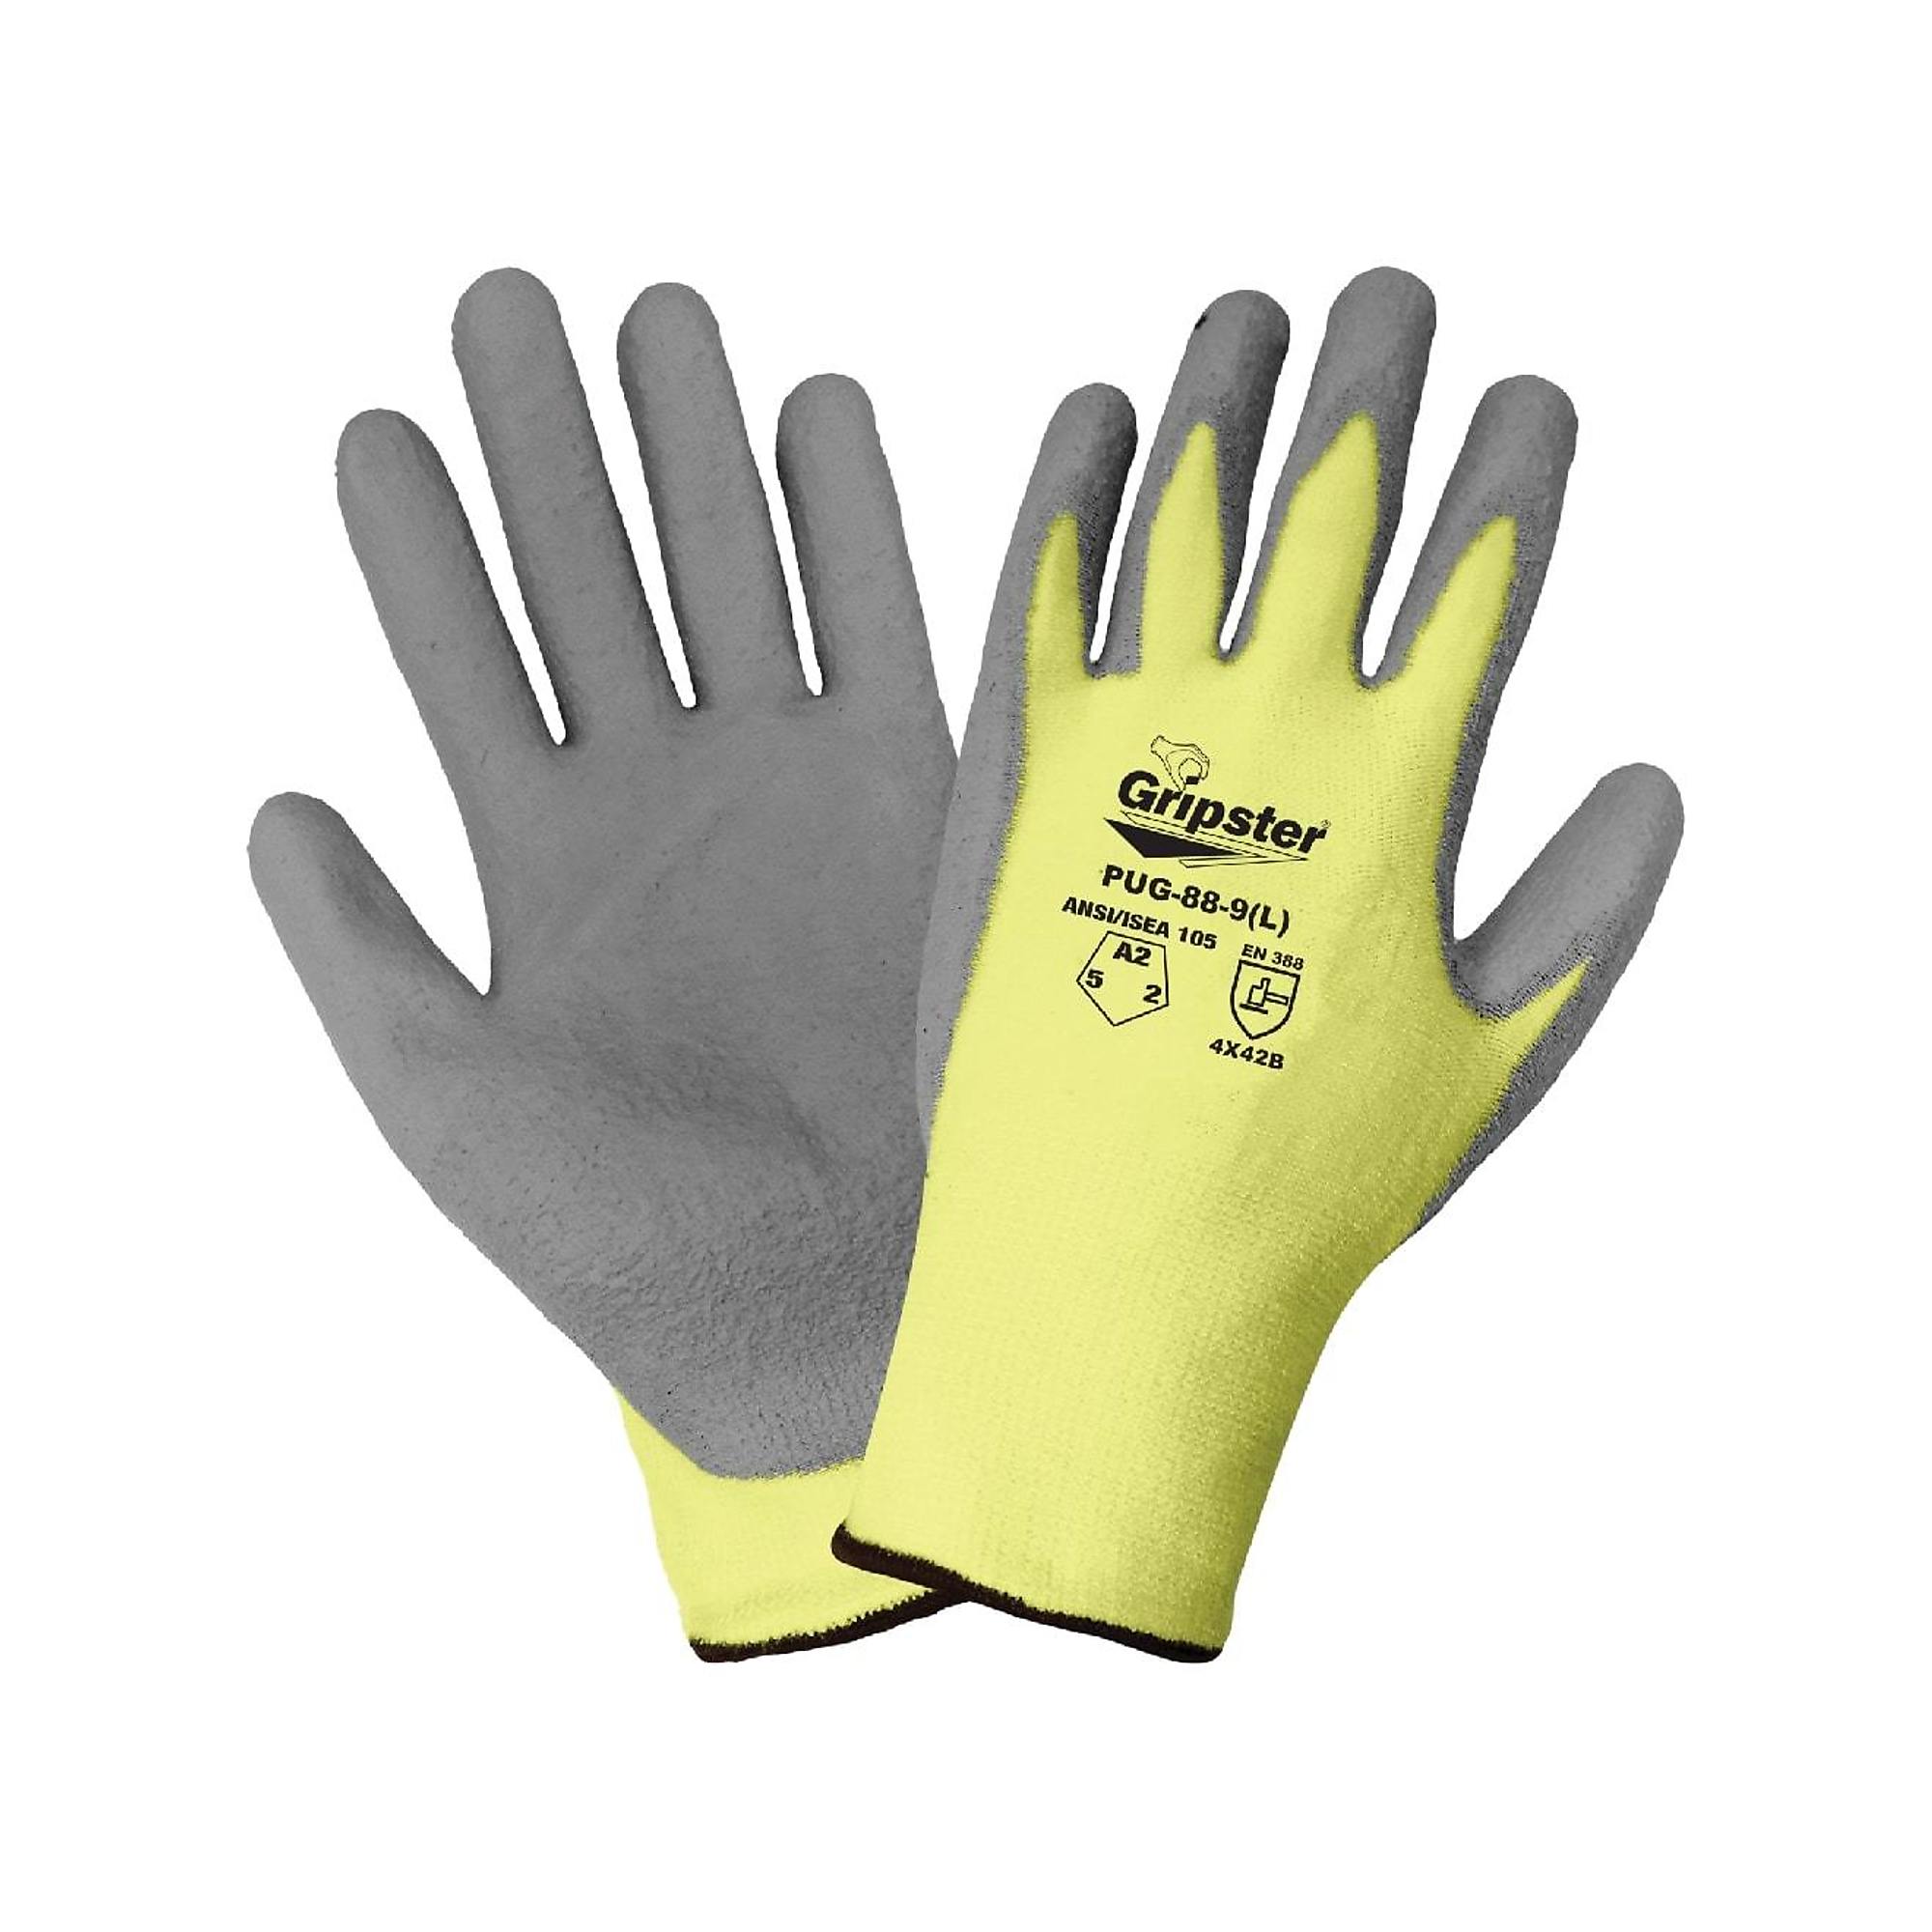 Global Glove Gripster , Yellow, Poly Coated, Cut Resistant A2 Gloves - 12 Pairs, Size L, Color Yellow/Gray, Included (qty.) 12 Model PUG-88-9(L)